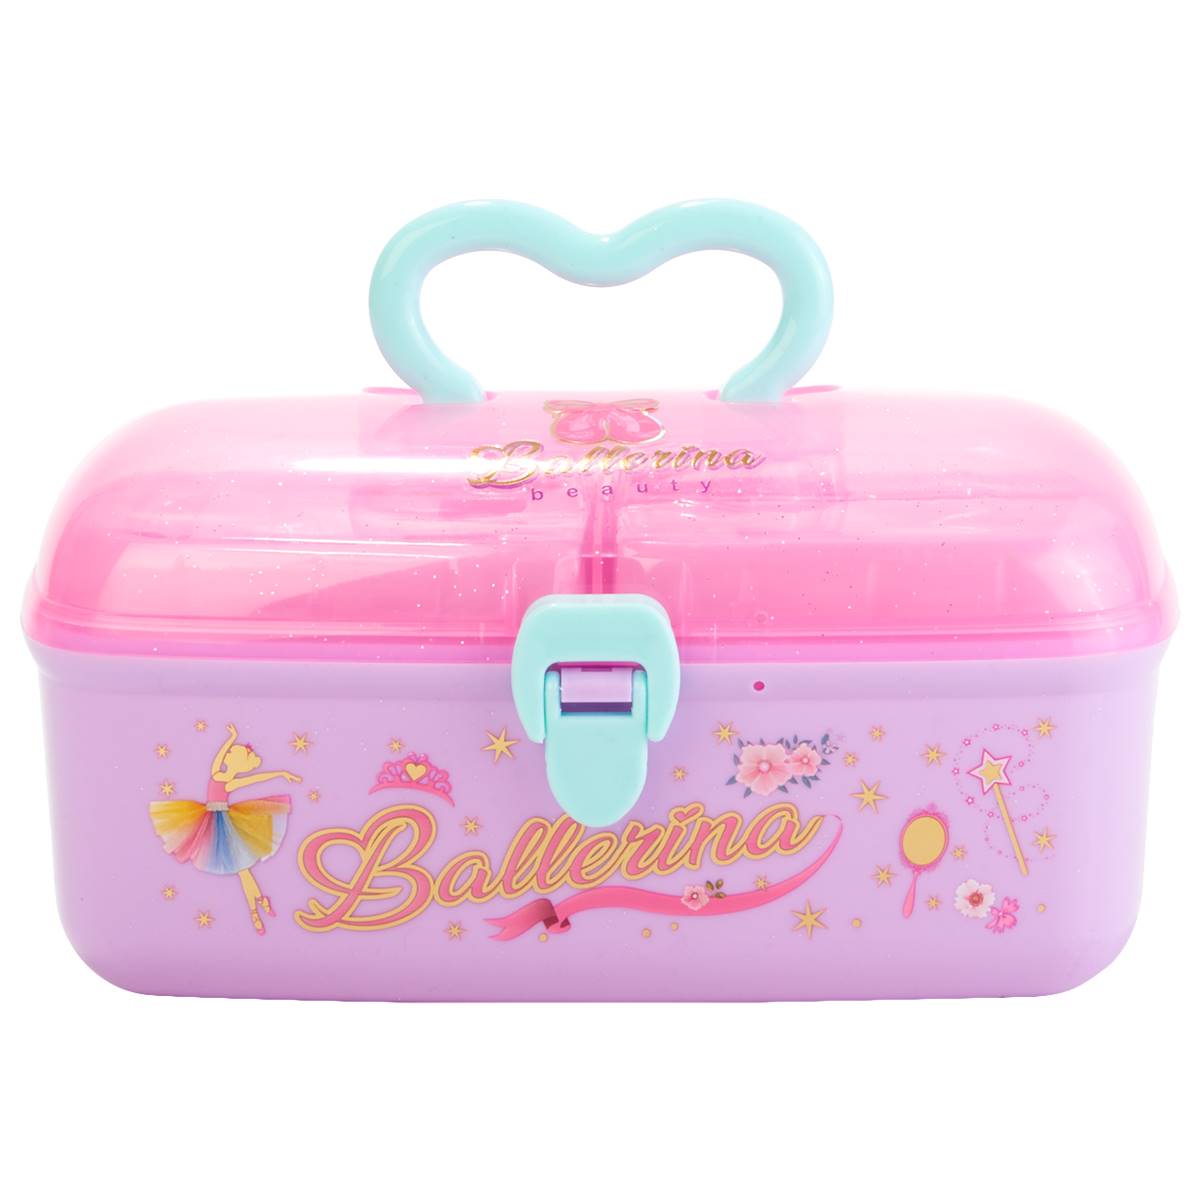 Girls Hot Focus(R) Ballerina Beauty Cosmetic Caboodle